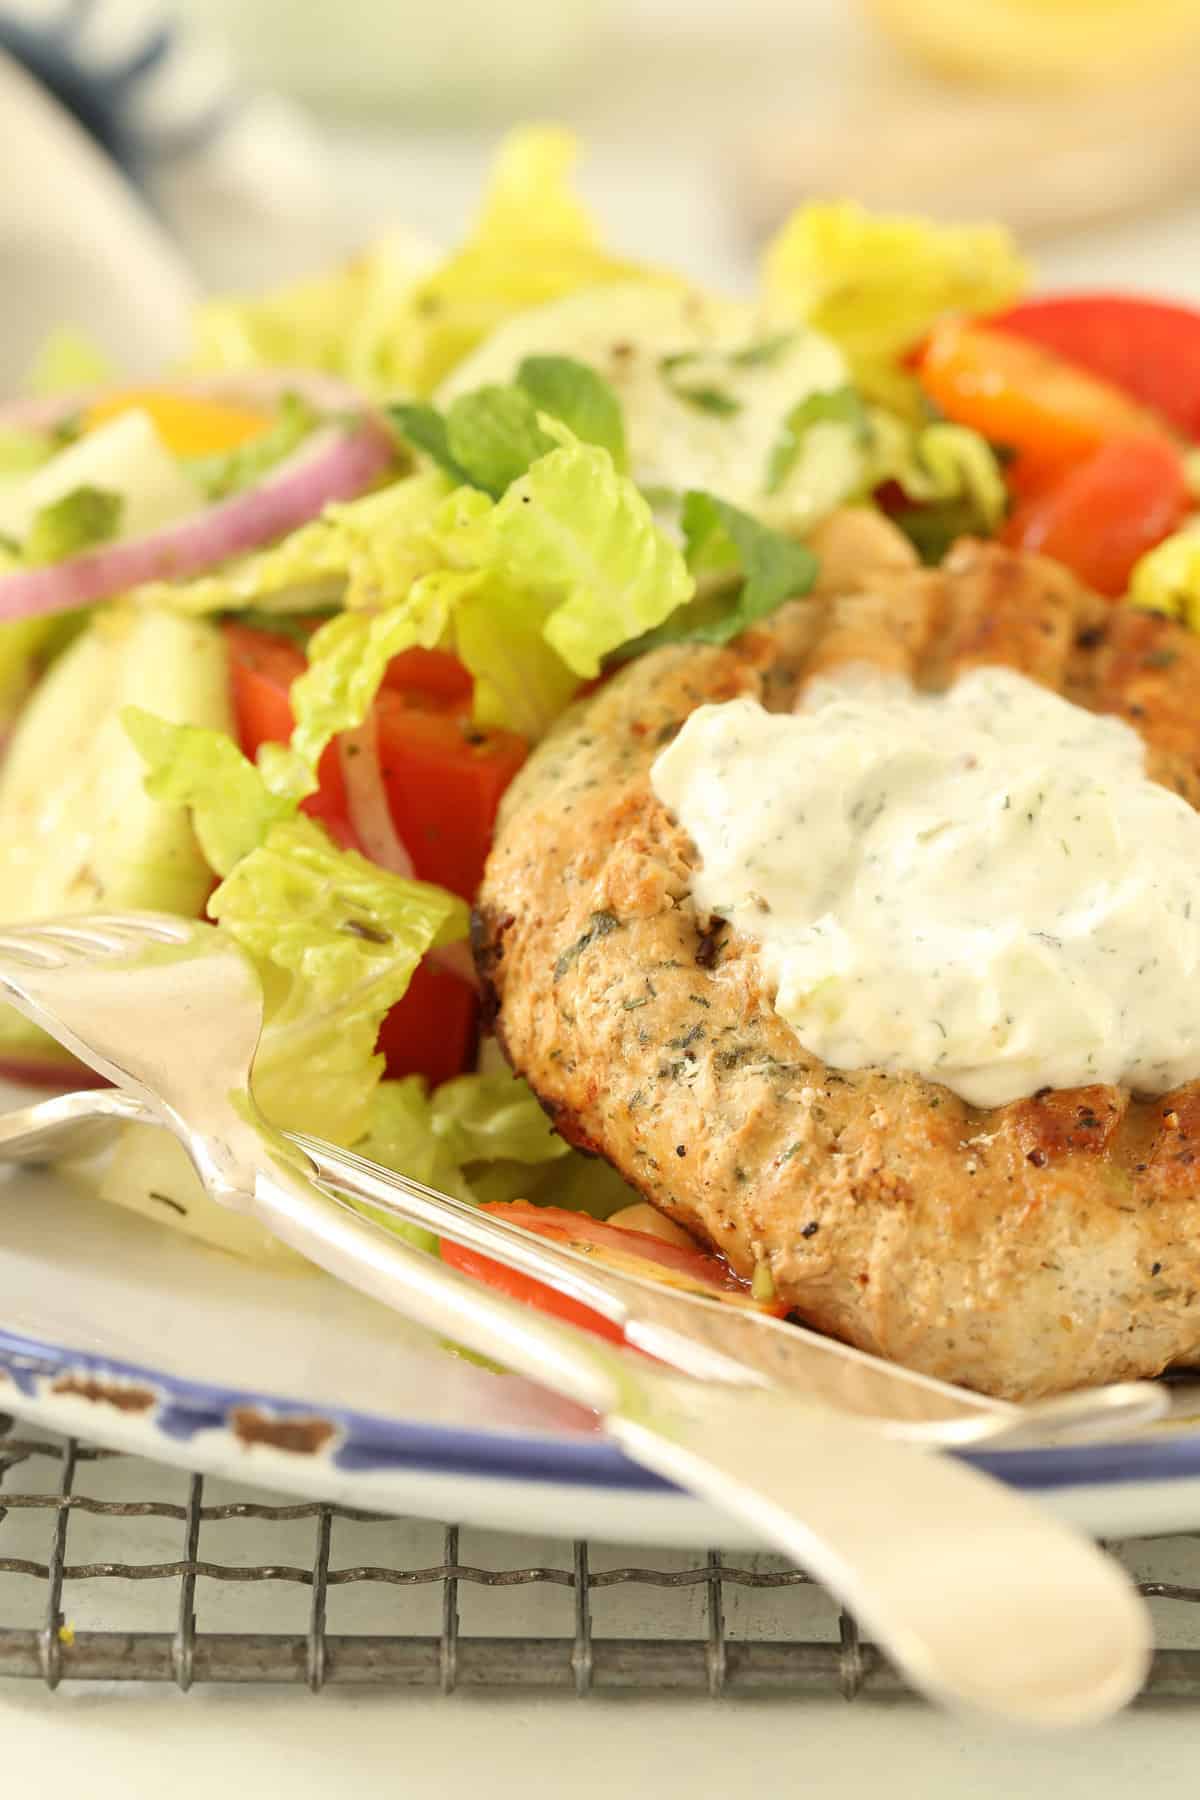 These juicy Grilled Turkey Burgers are a healthy, deliciously seasoned and are super easy Greek turkey burgers to pull together.